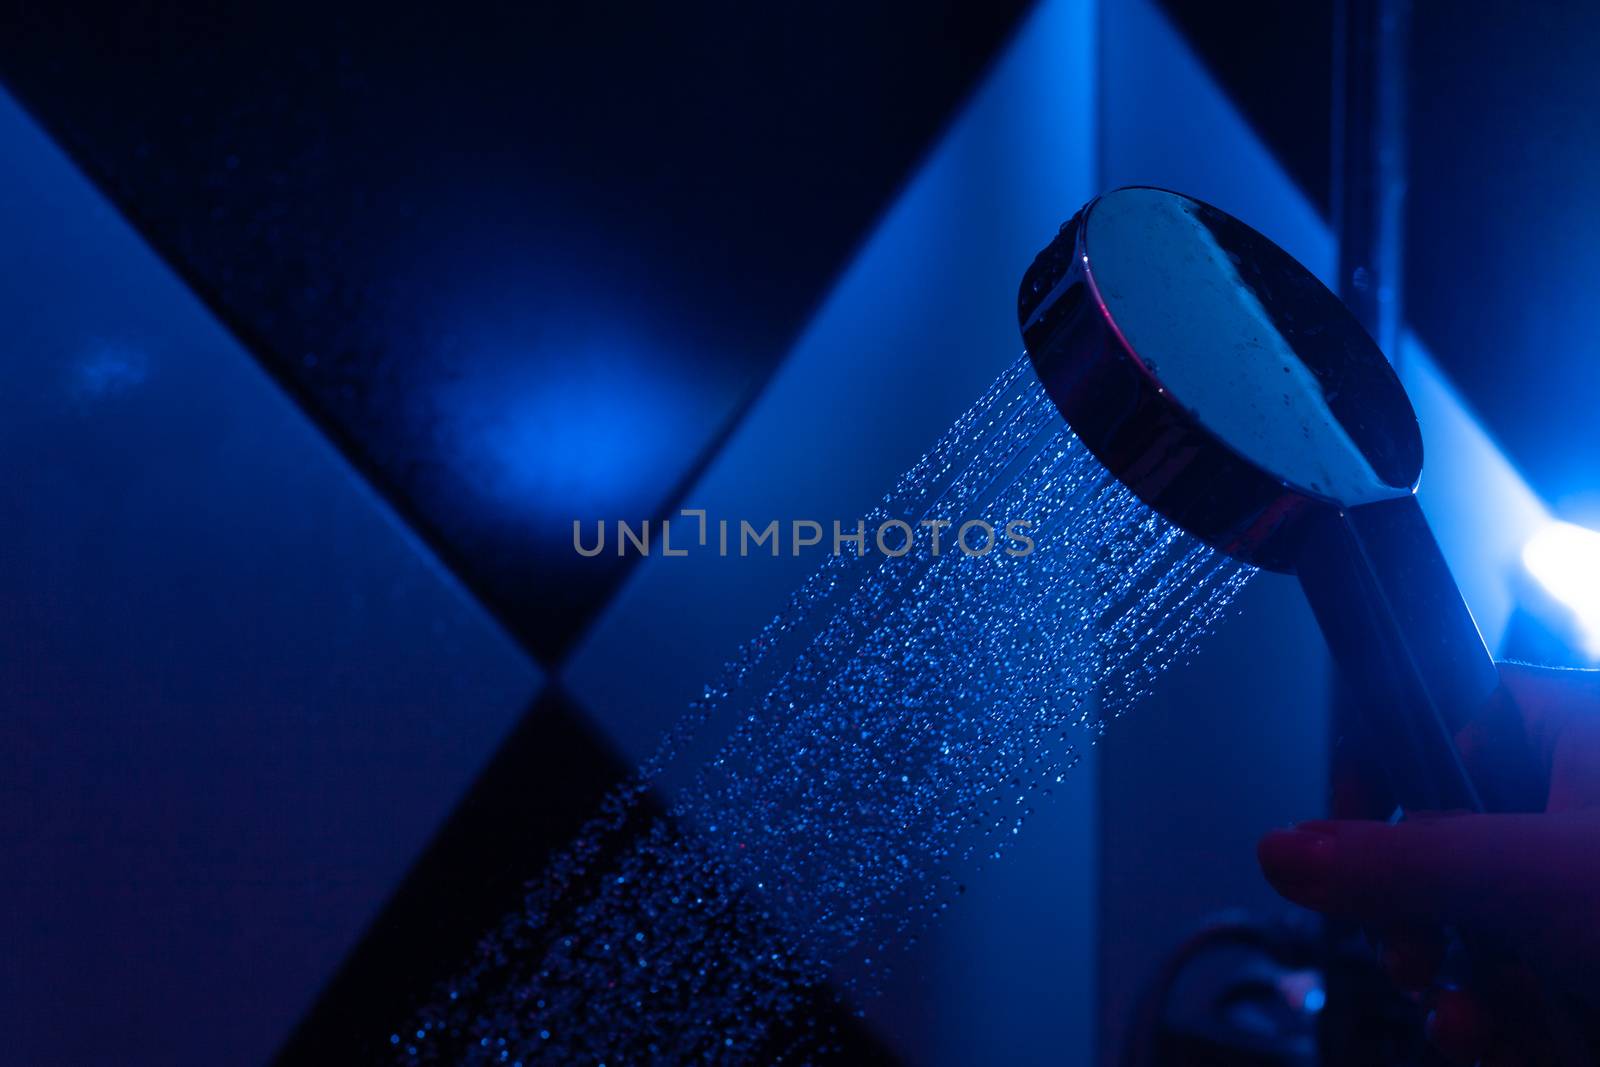 Girl holds a watering can in a shower cabin with blue backlight. by Opikanets